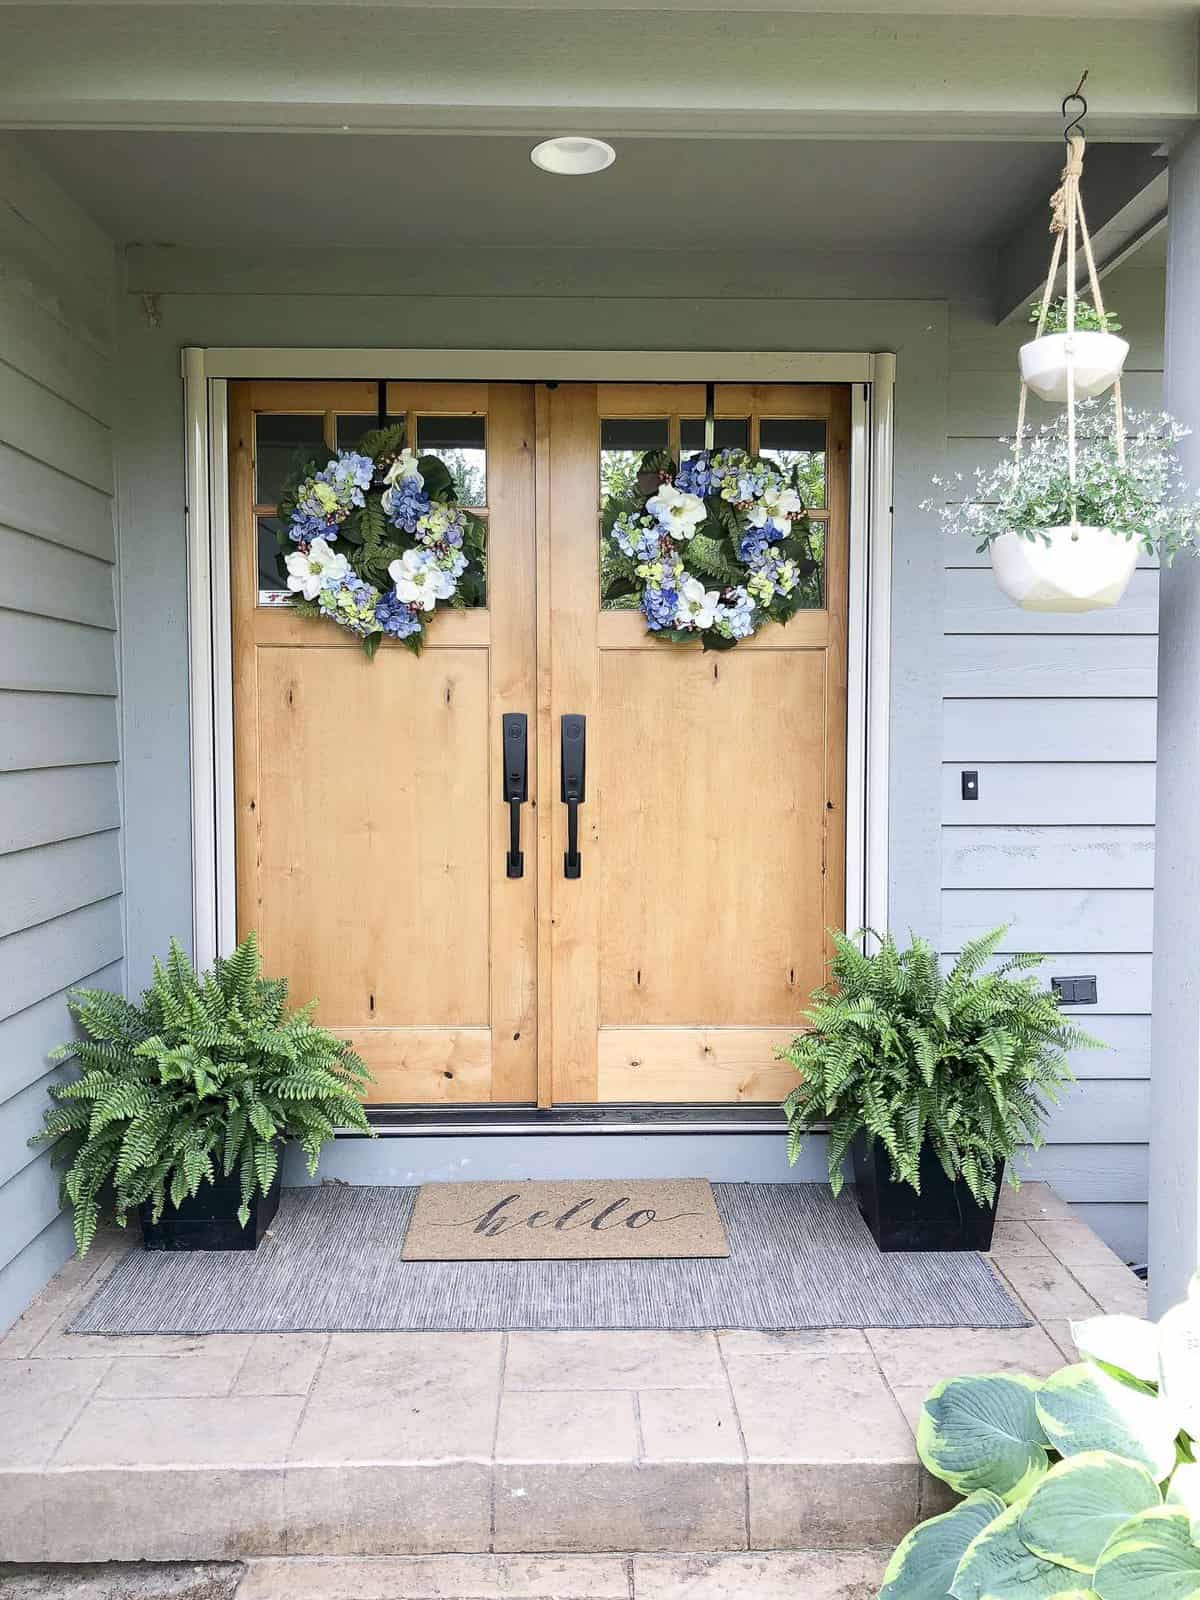 How To Create a Welcoming Summer Entryway. Easy ideas to design your summer entryway for easy, breezy, & simple entertaining. Welcome your guests with style.